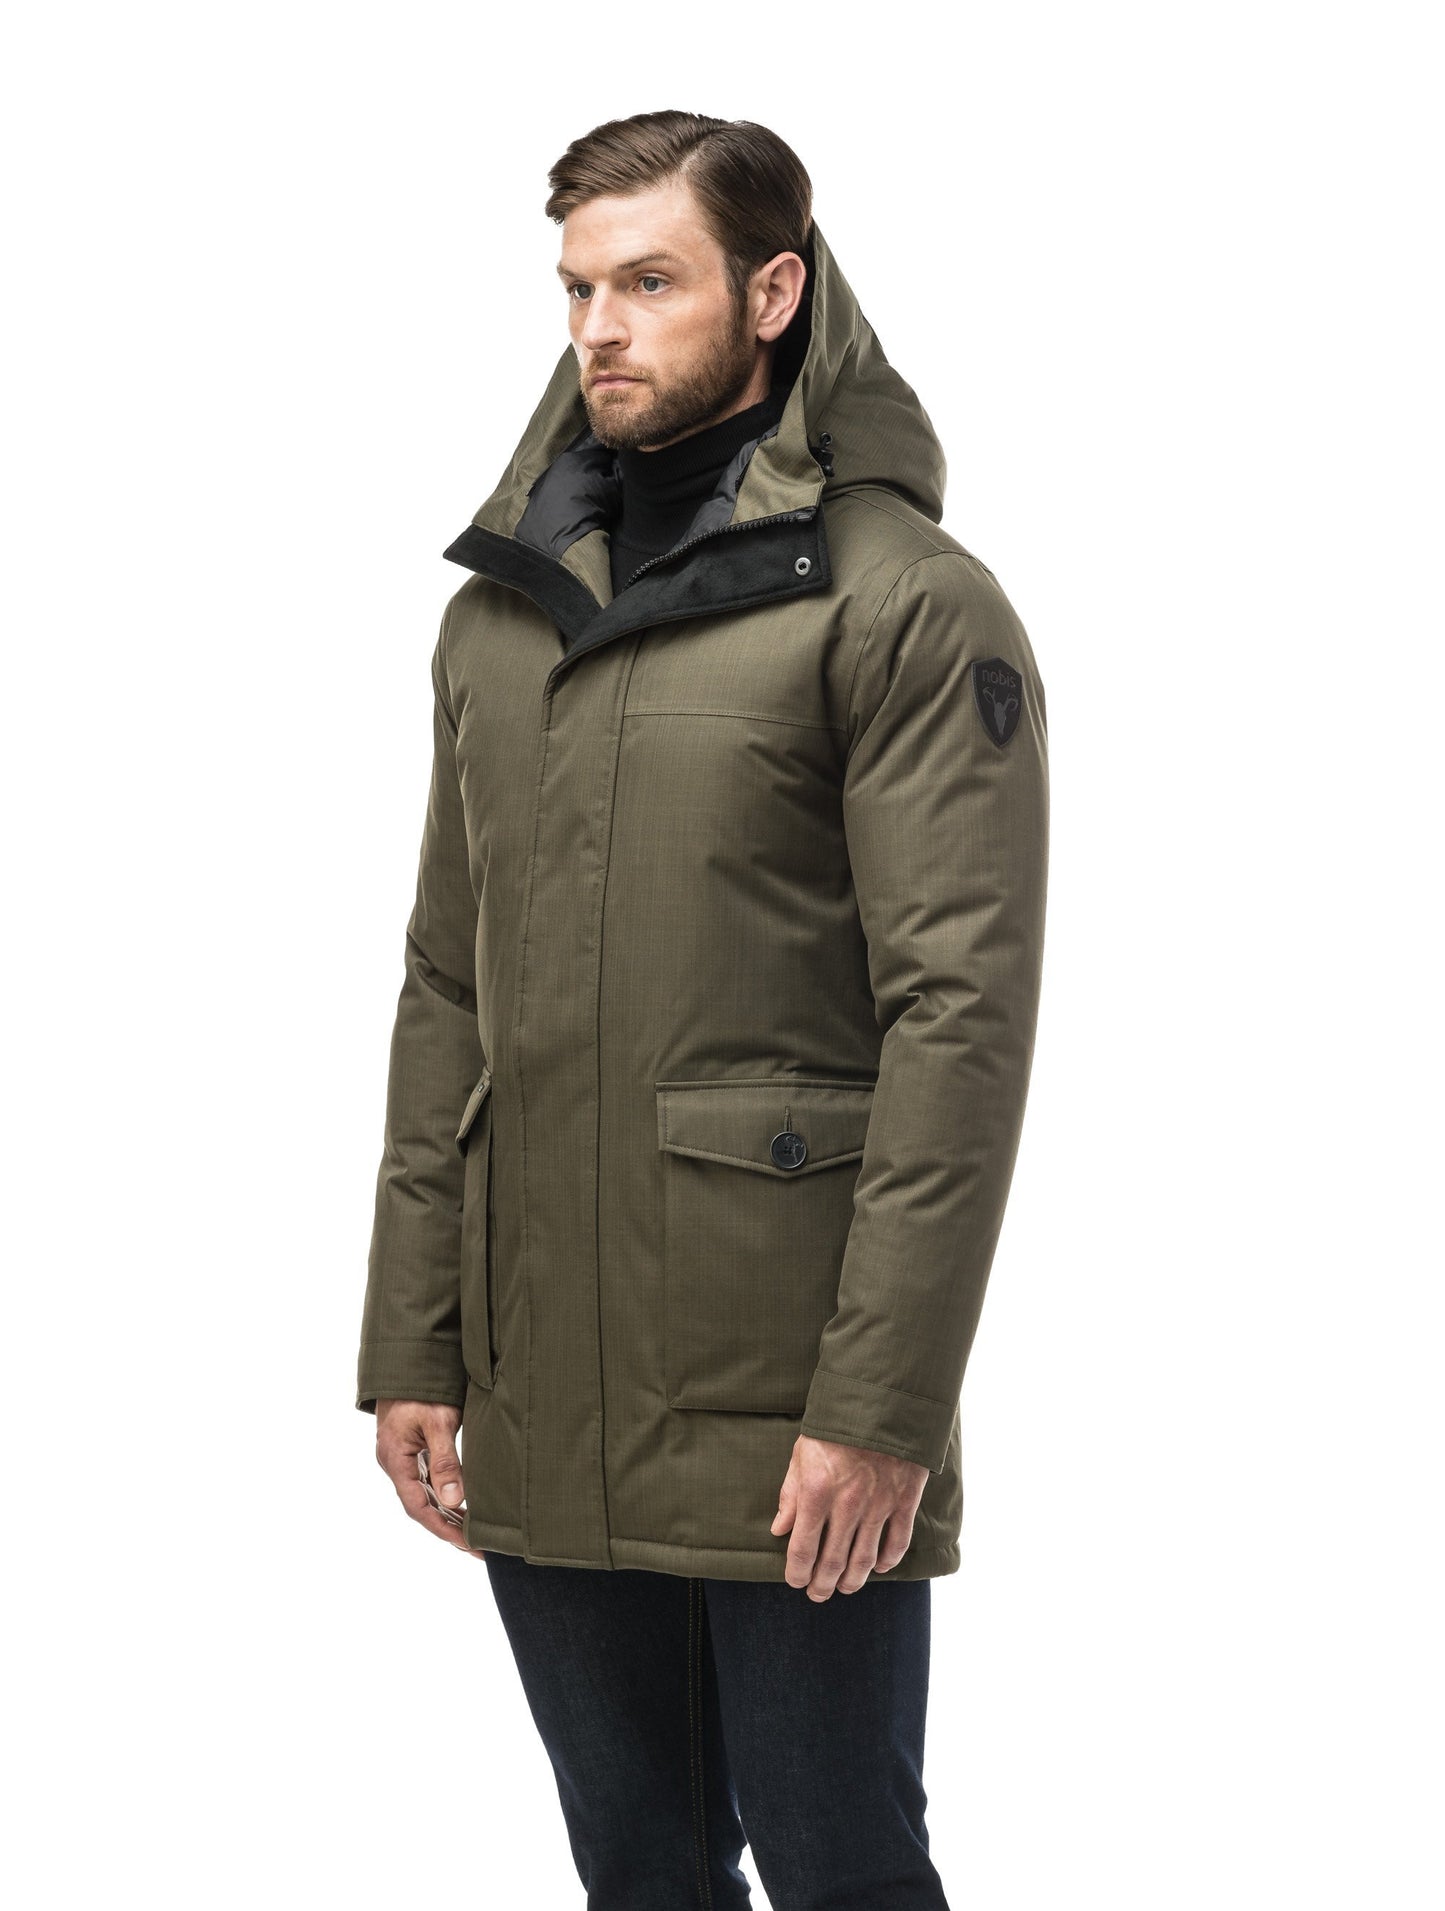 Men's slim fitting waist length parka with removable fur trim on the hood and two waist patch pockets in CH Army Green